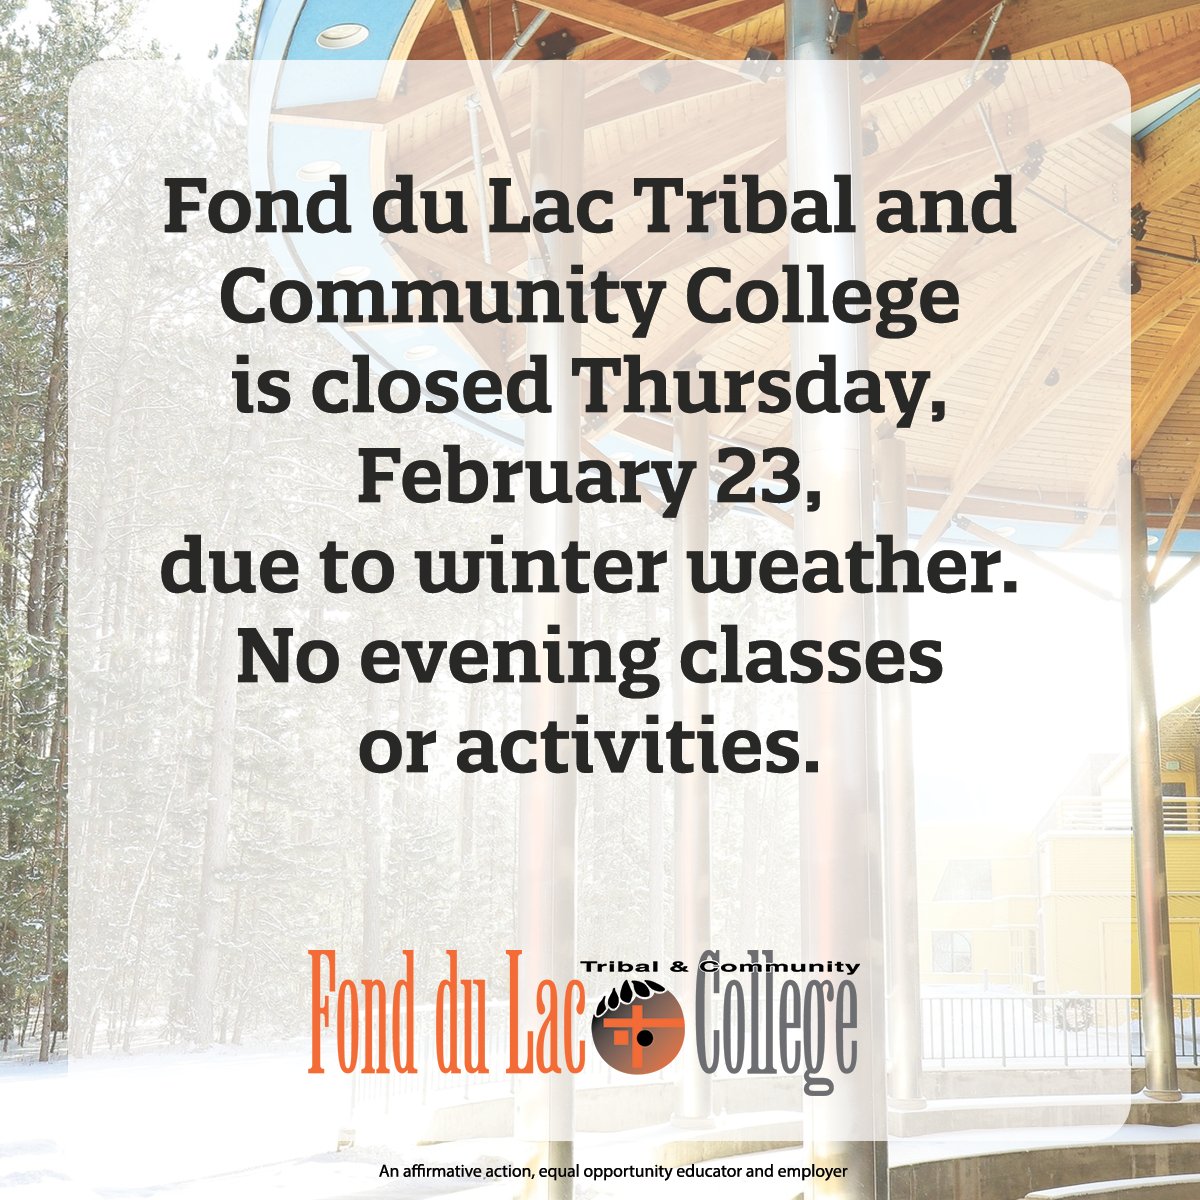 FDLTCC is closed Thursday, February 23, due to winter weather. No evening classes or activities. We hope you stay safe in today's weather.